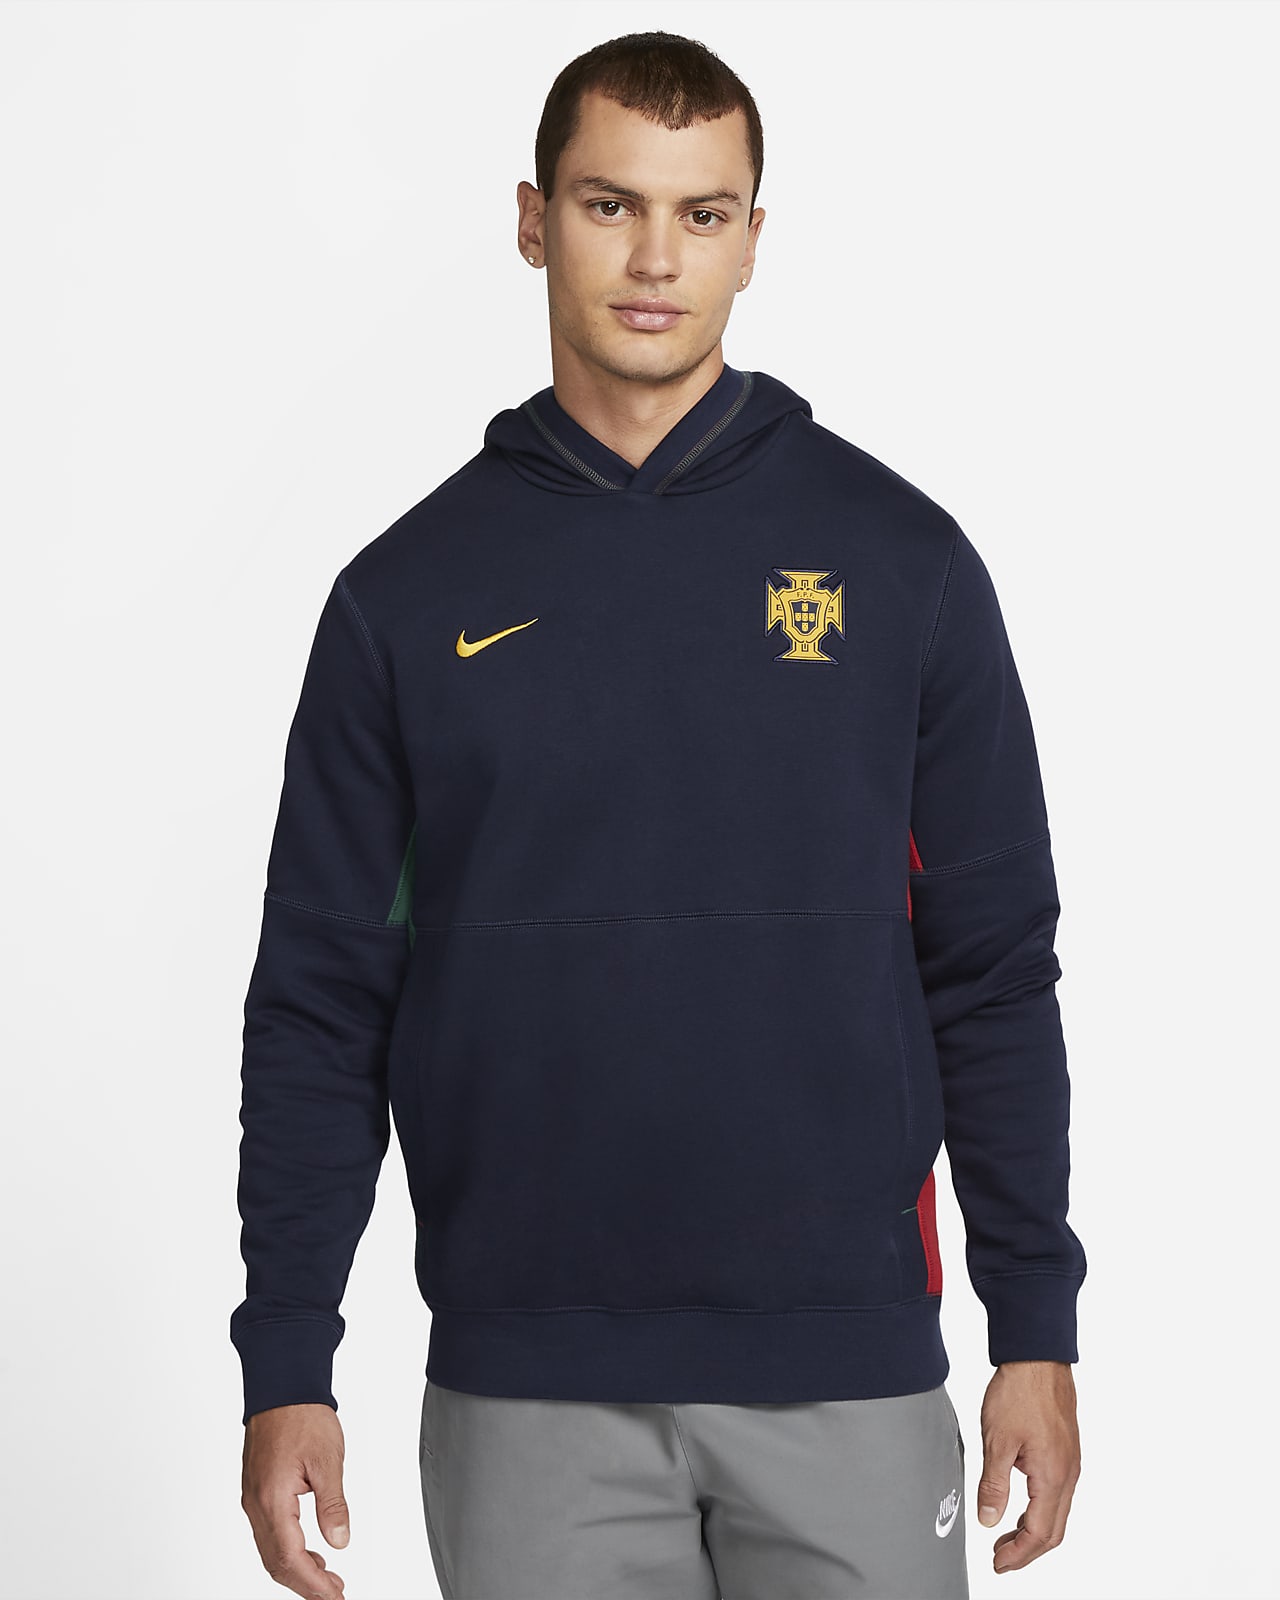 Portugal Men's Nike French Terry Football Hoodie